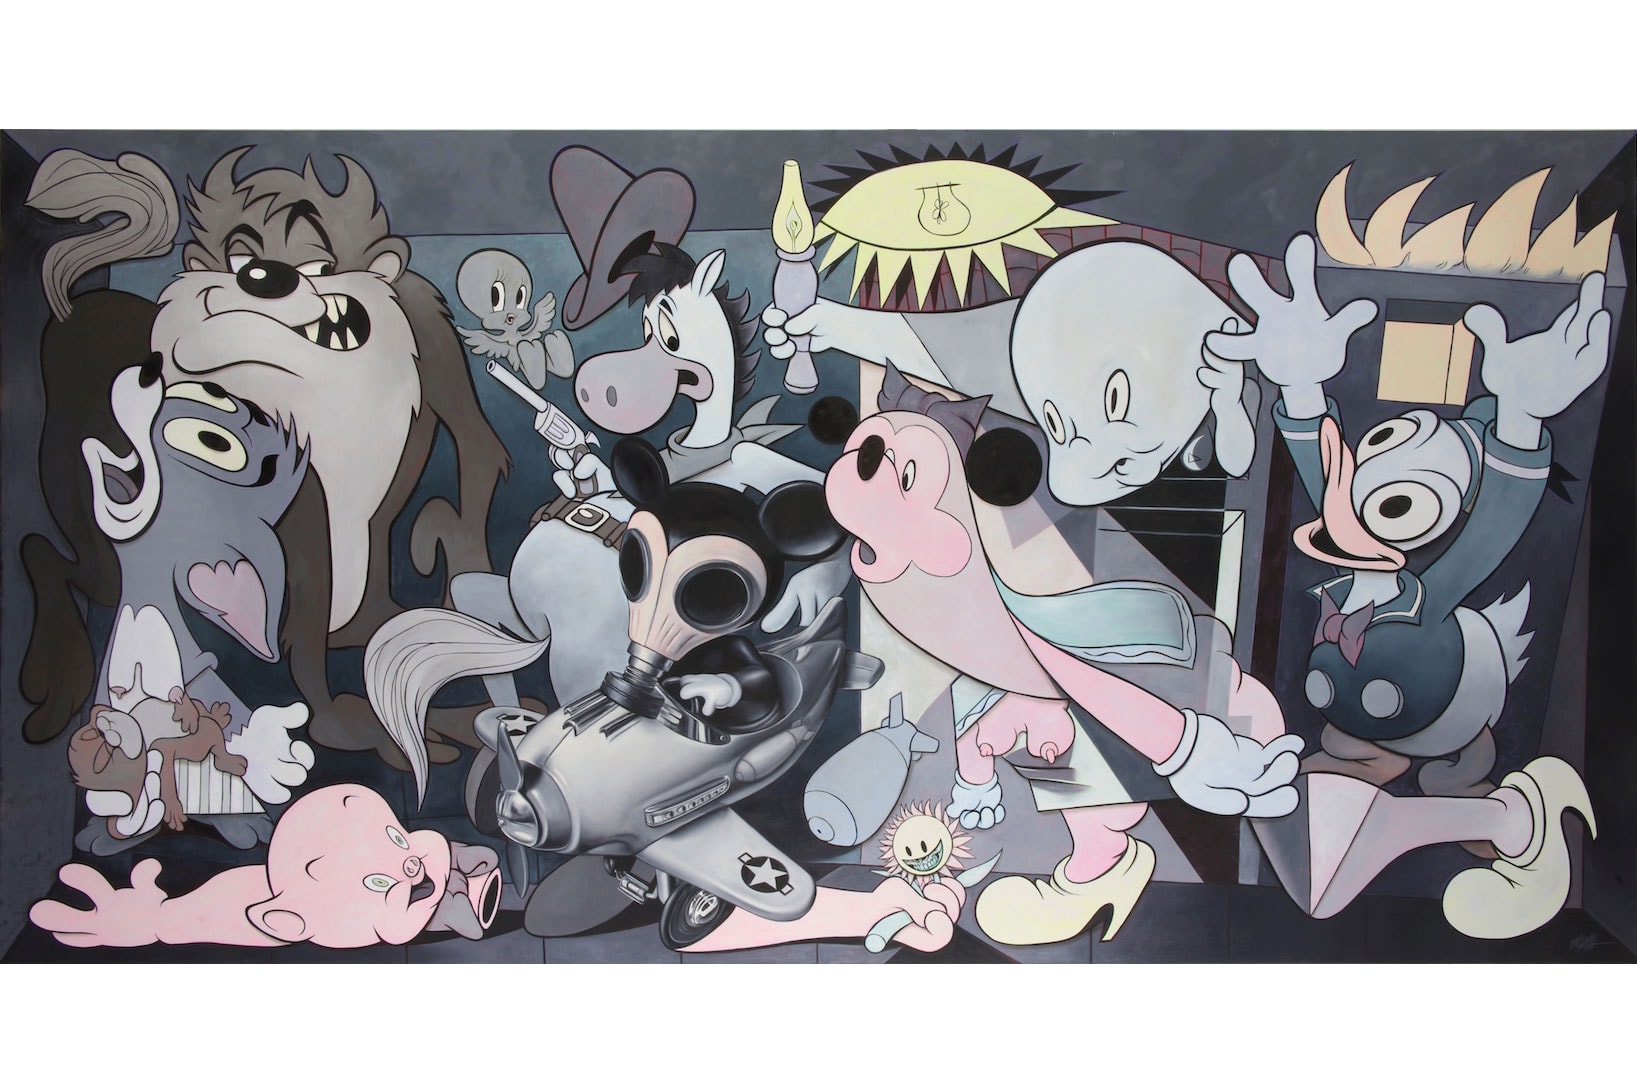 'Ron English Guernica' at the Allouche Gallery in NYC